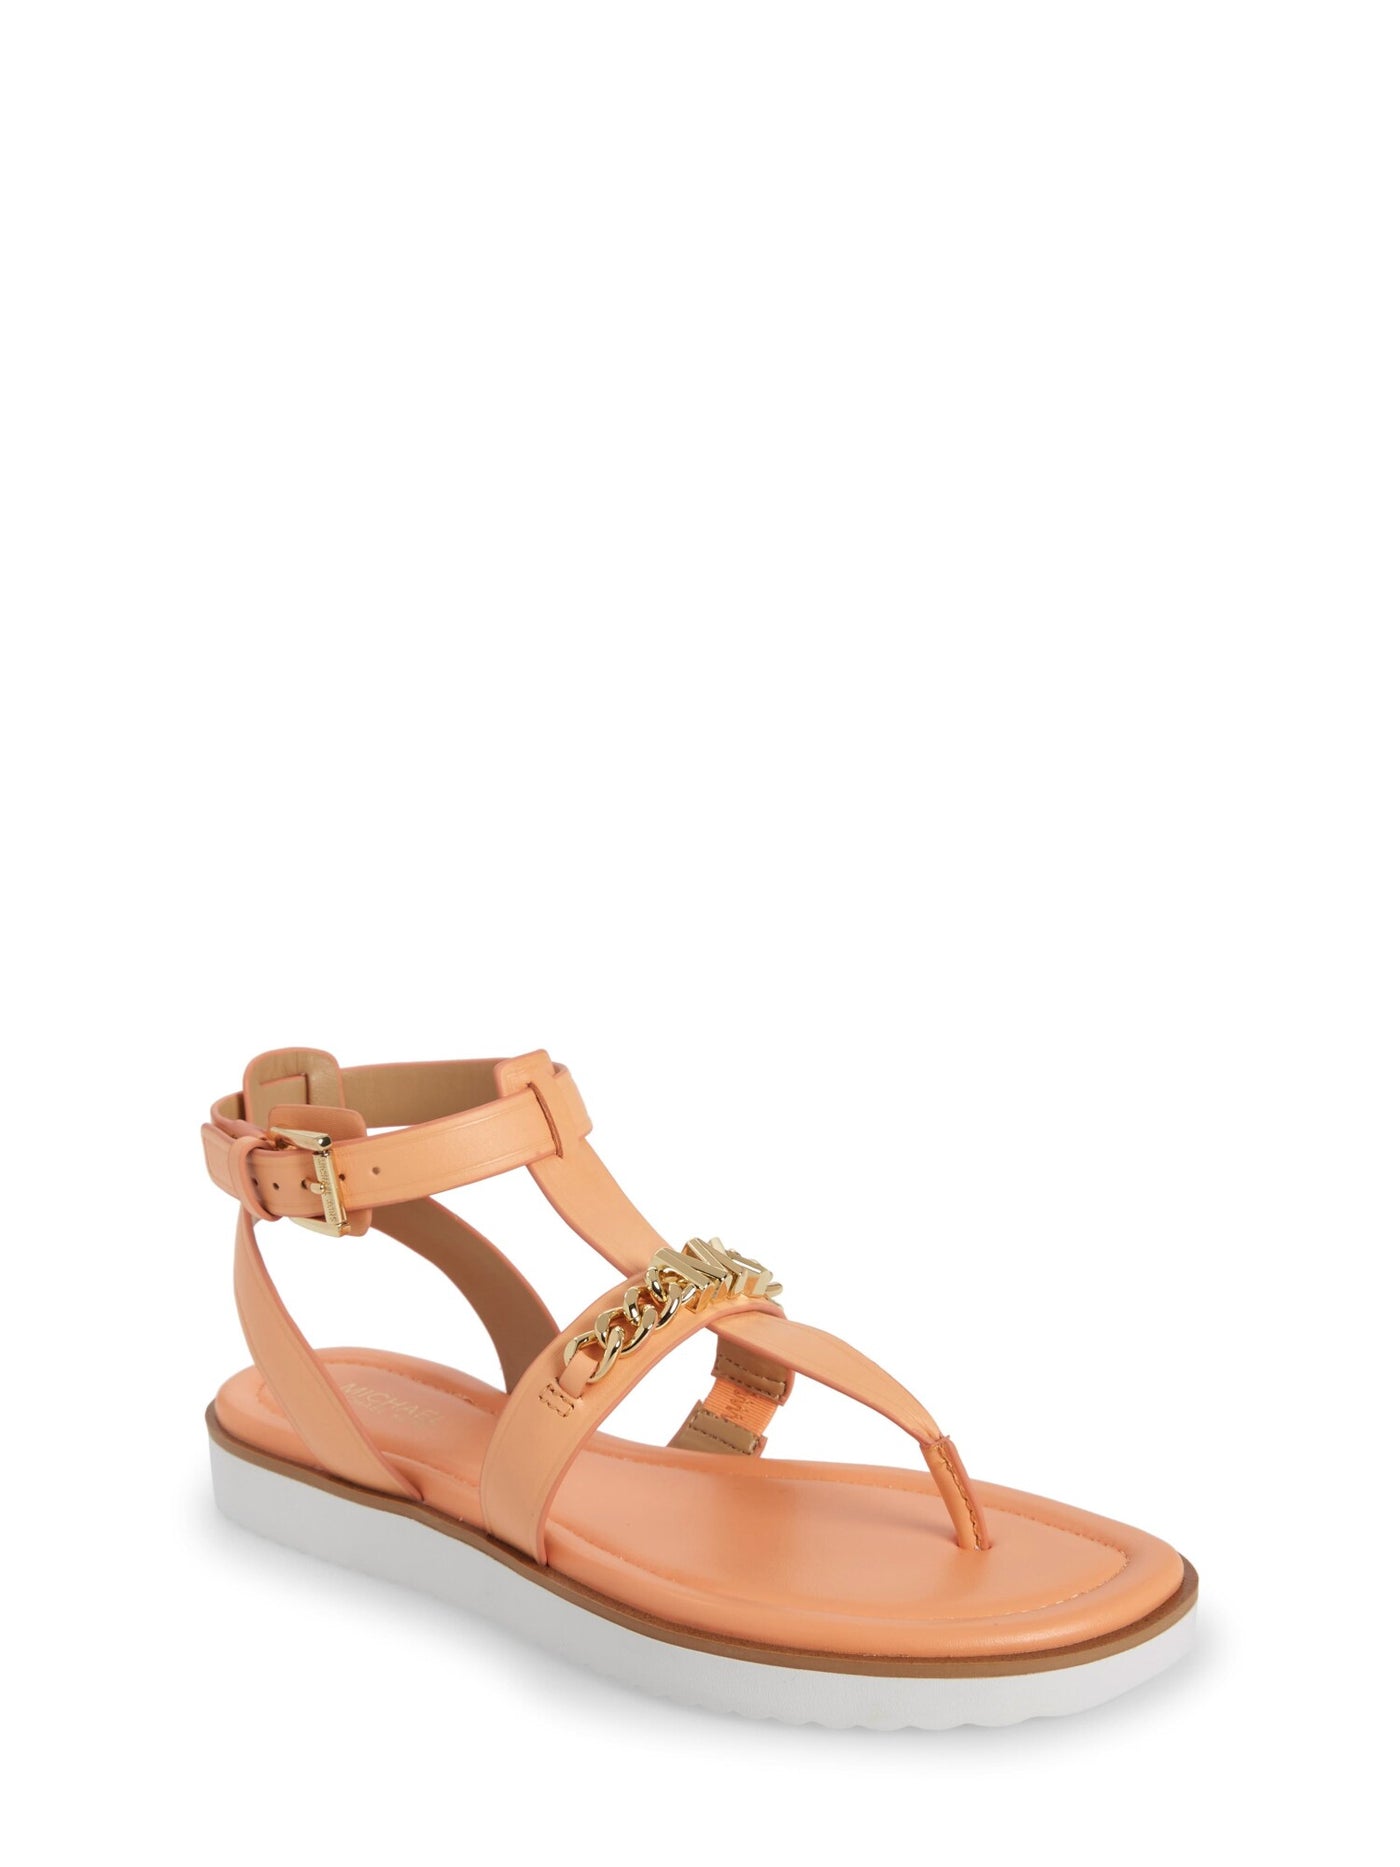 MICHAEL MICHAEL KORS Womens Orange Logo Hardware Chain Accent T-Strap Ankle Strap Farrow Round Toe Buckle Leather Gladiator Sandals Shoes 5 M